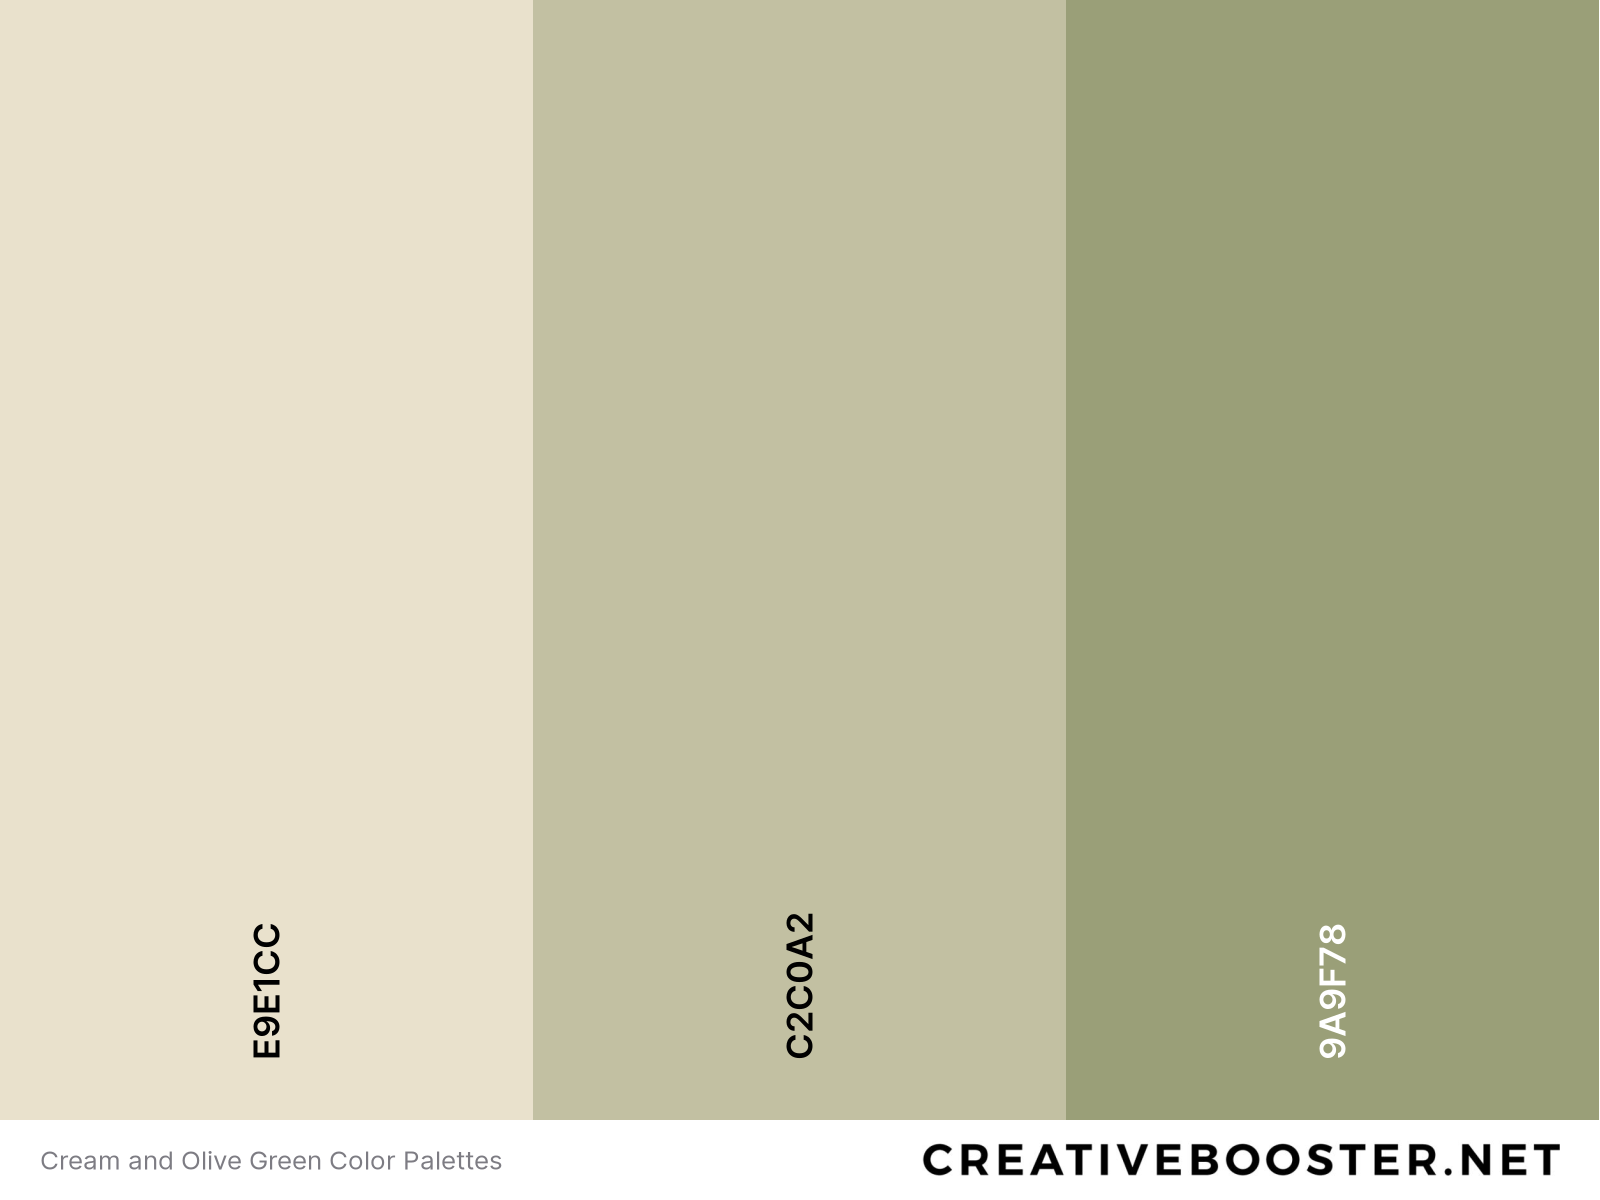 Cream and Olive Green Color Palettes